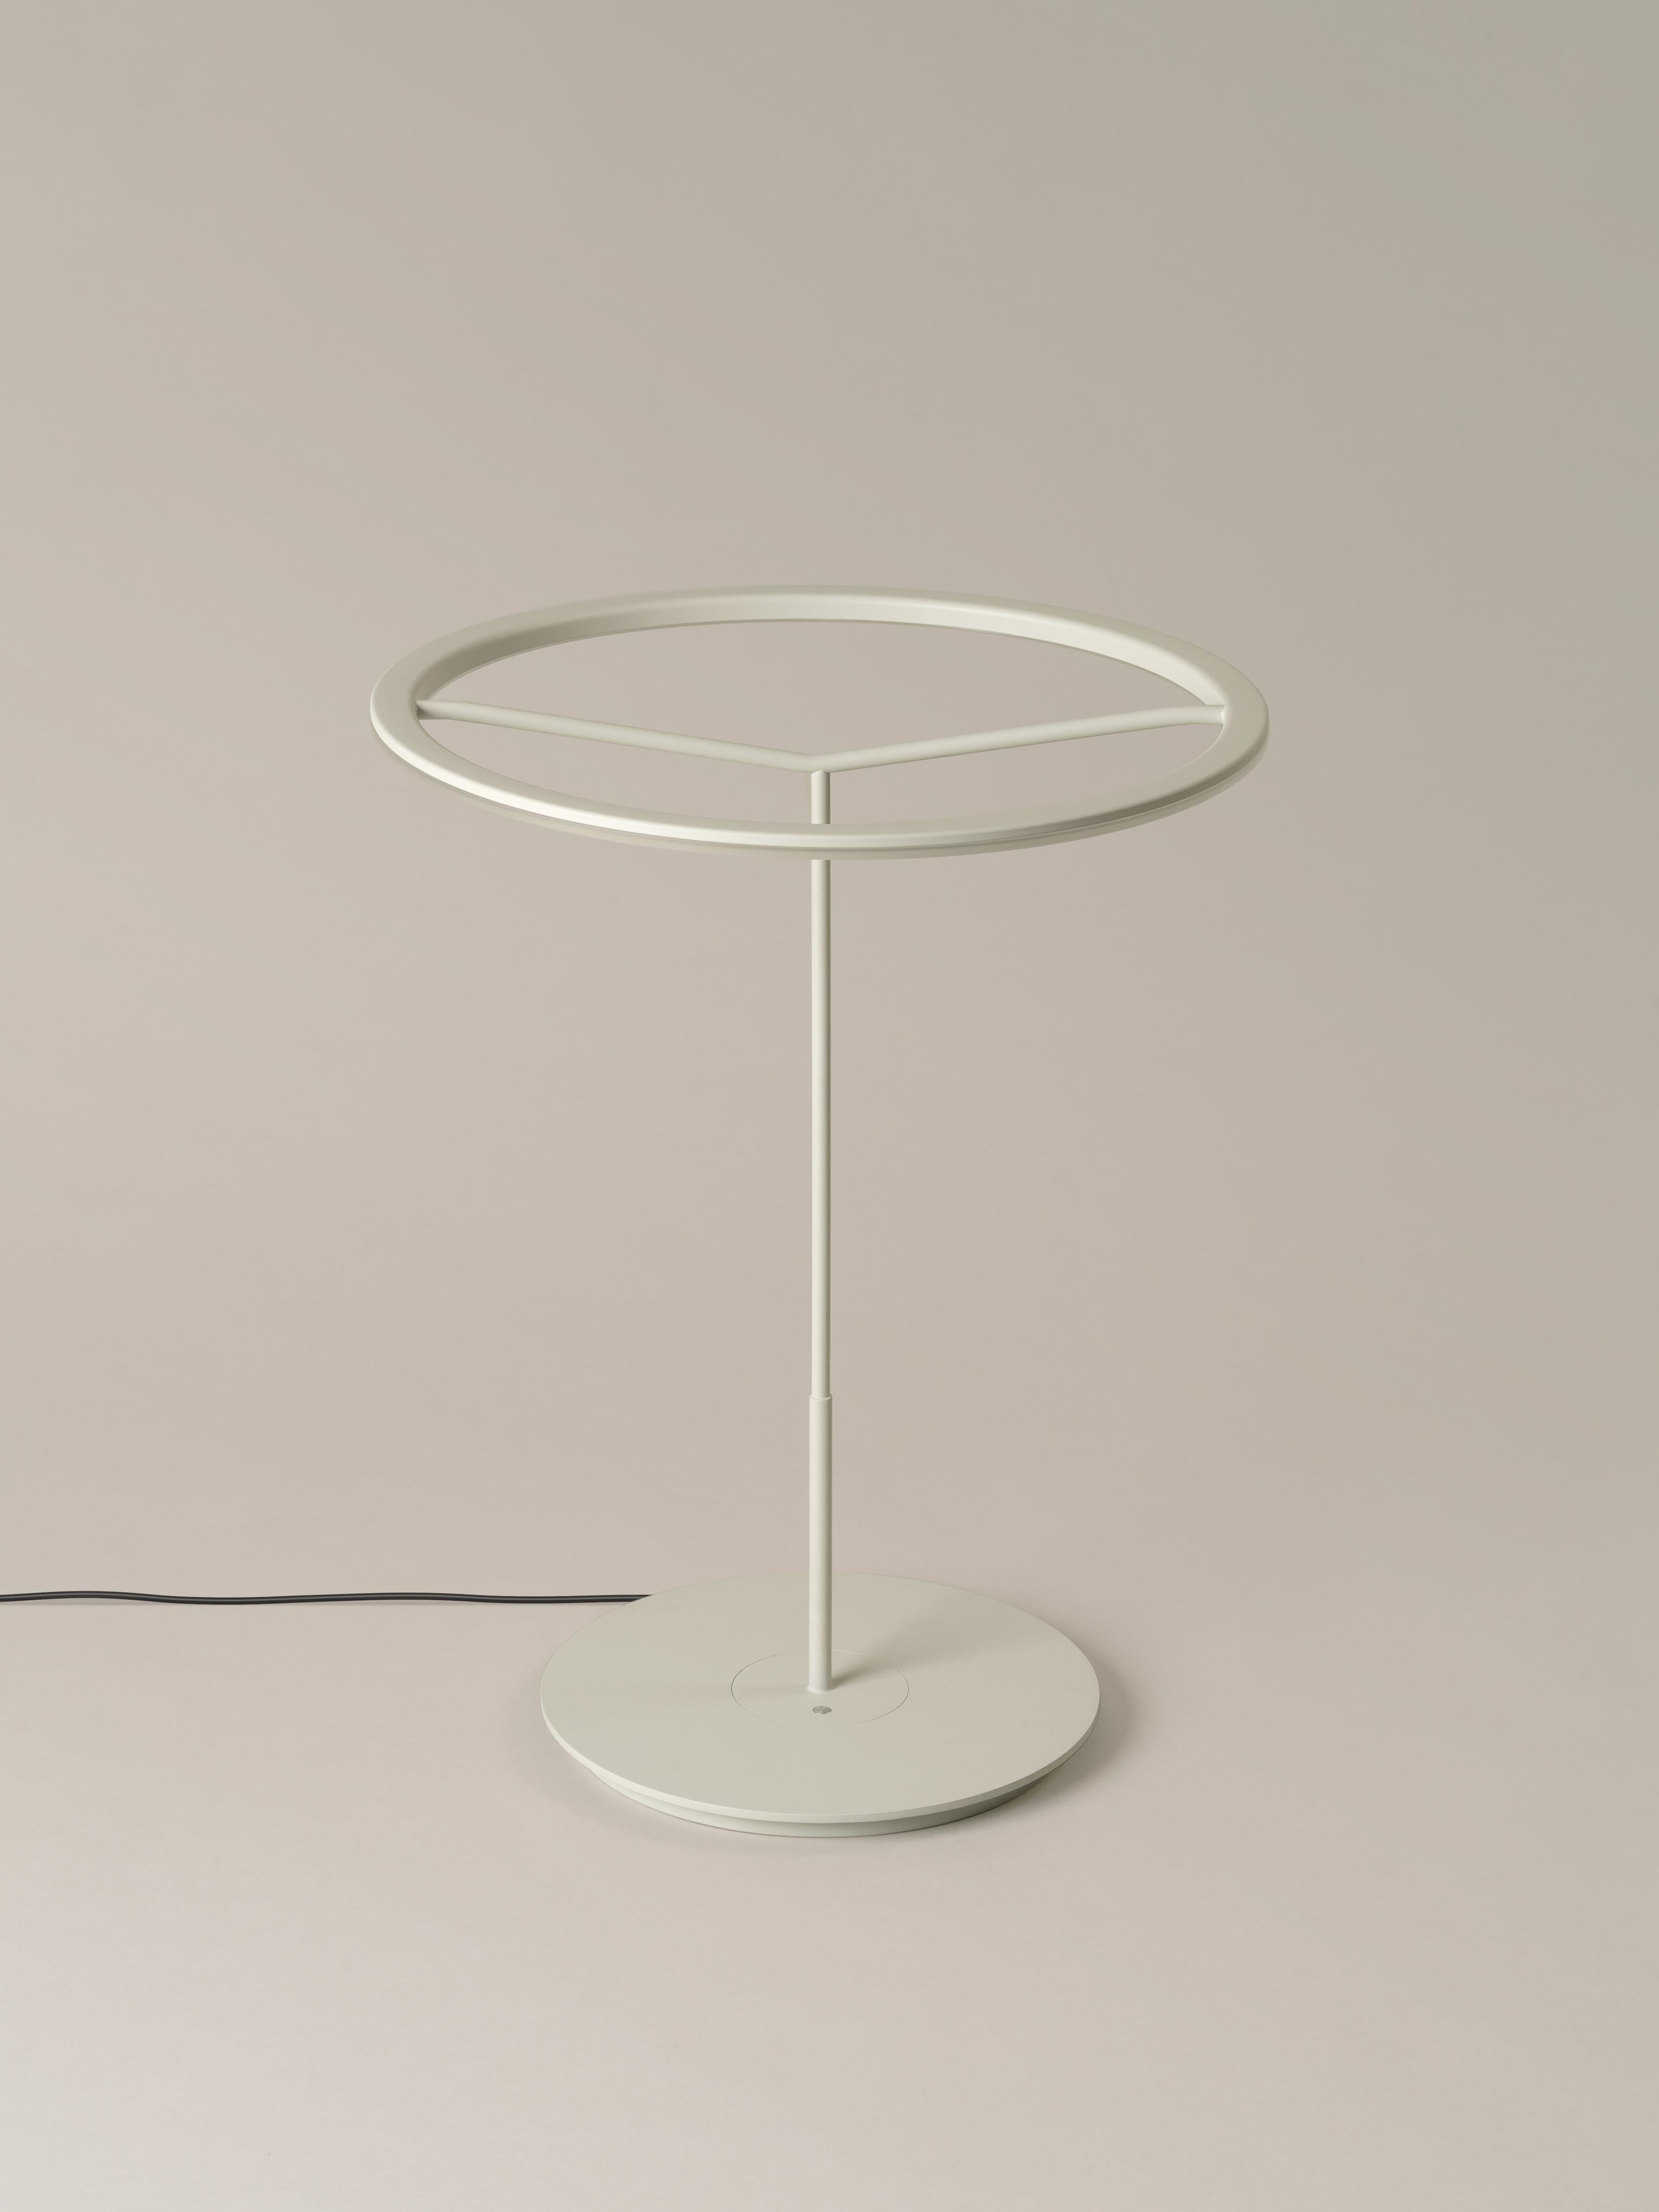 Large White Sin table lamp by Antoni Arola.
Dimensions: D 45 x H 58 cm.
Materials: Metal.
Available in white or graphite, with or without shade.

A lamp that combines simplicity and technology to create a lucent ring of light suspended in the